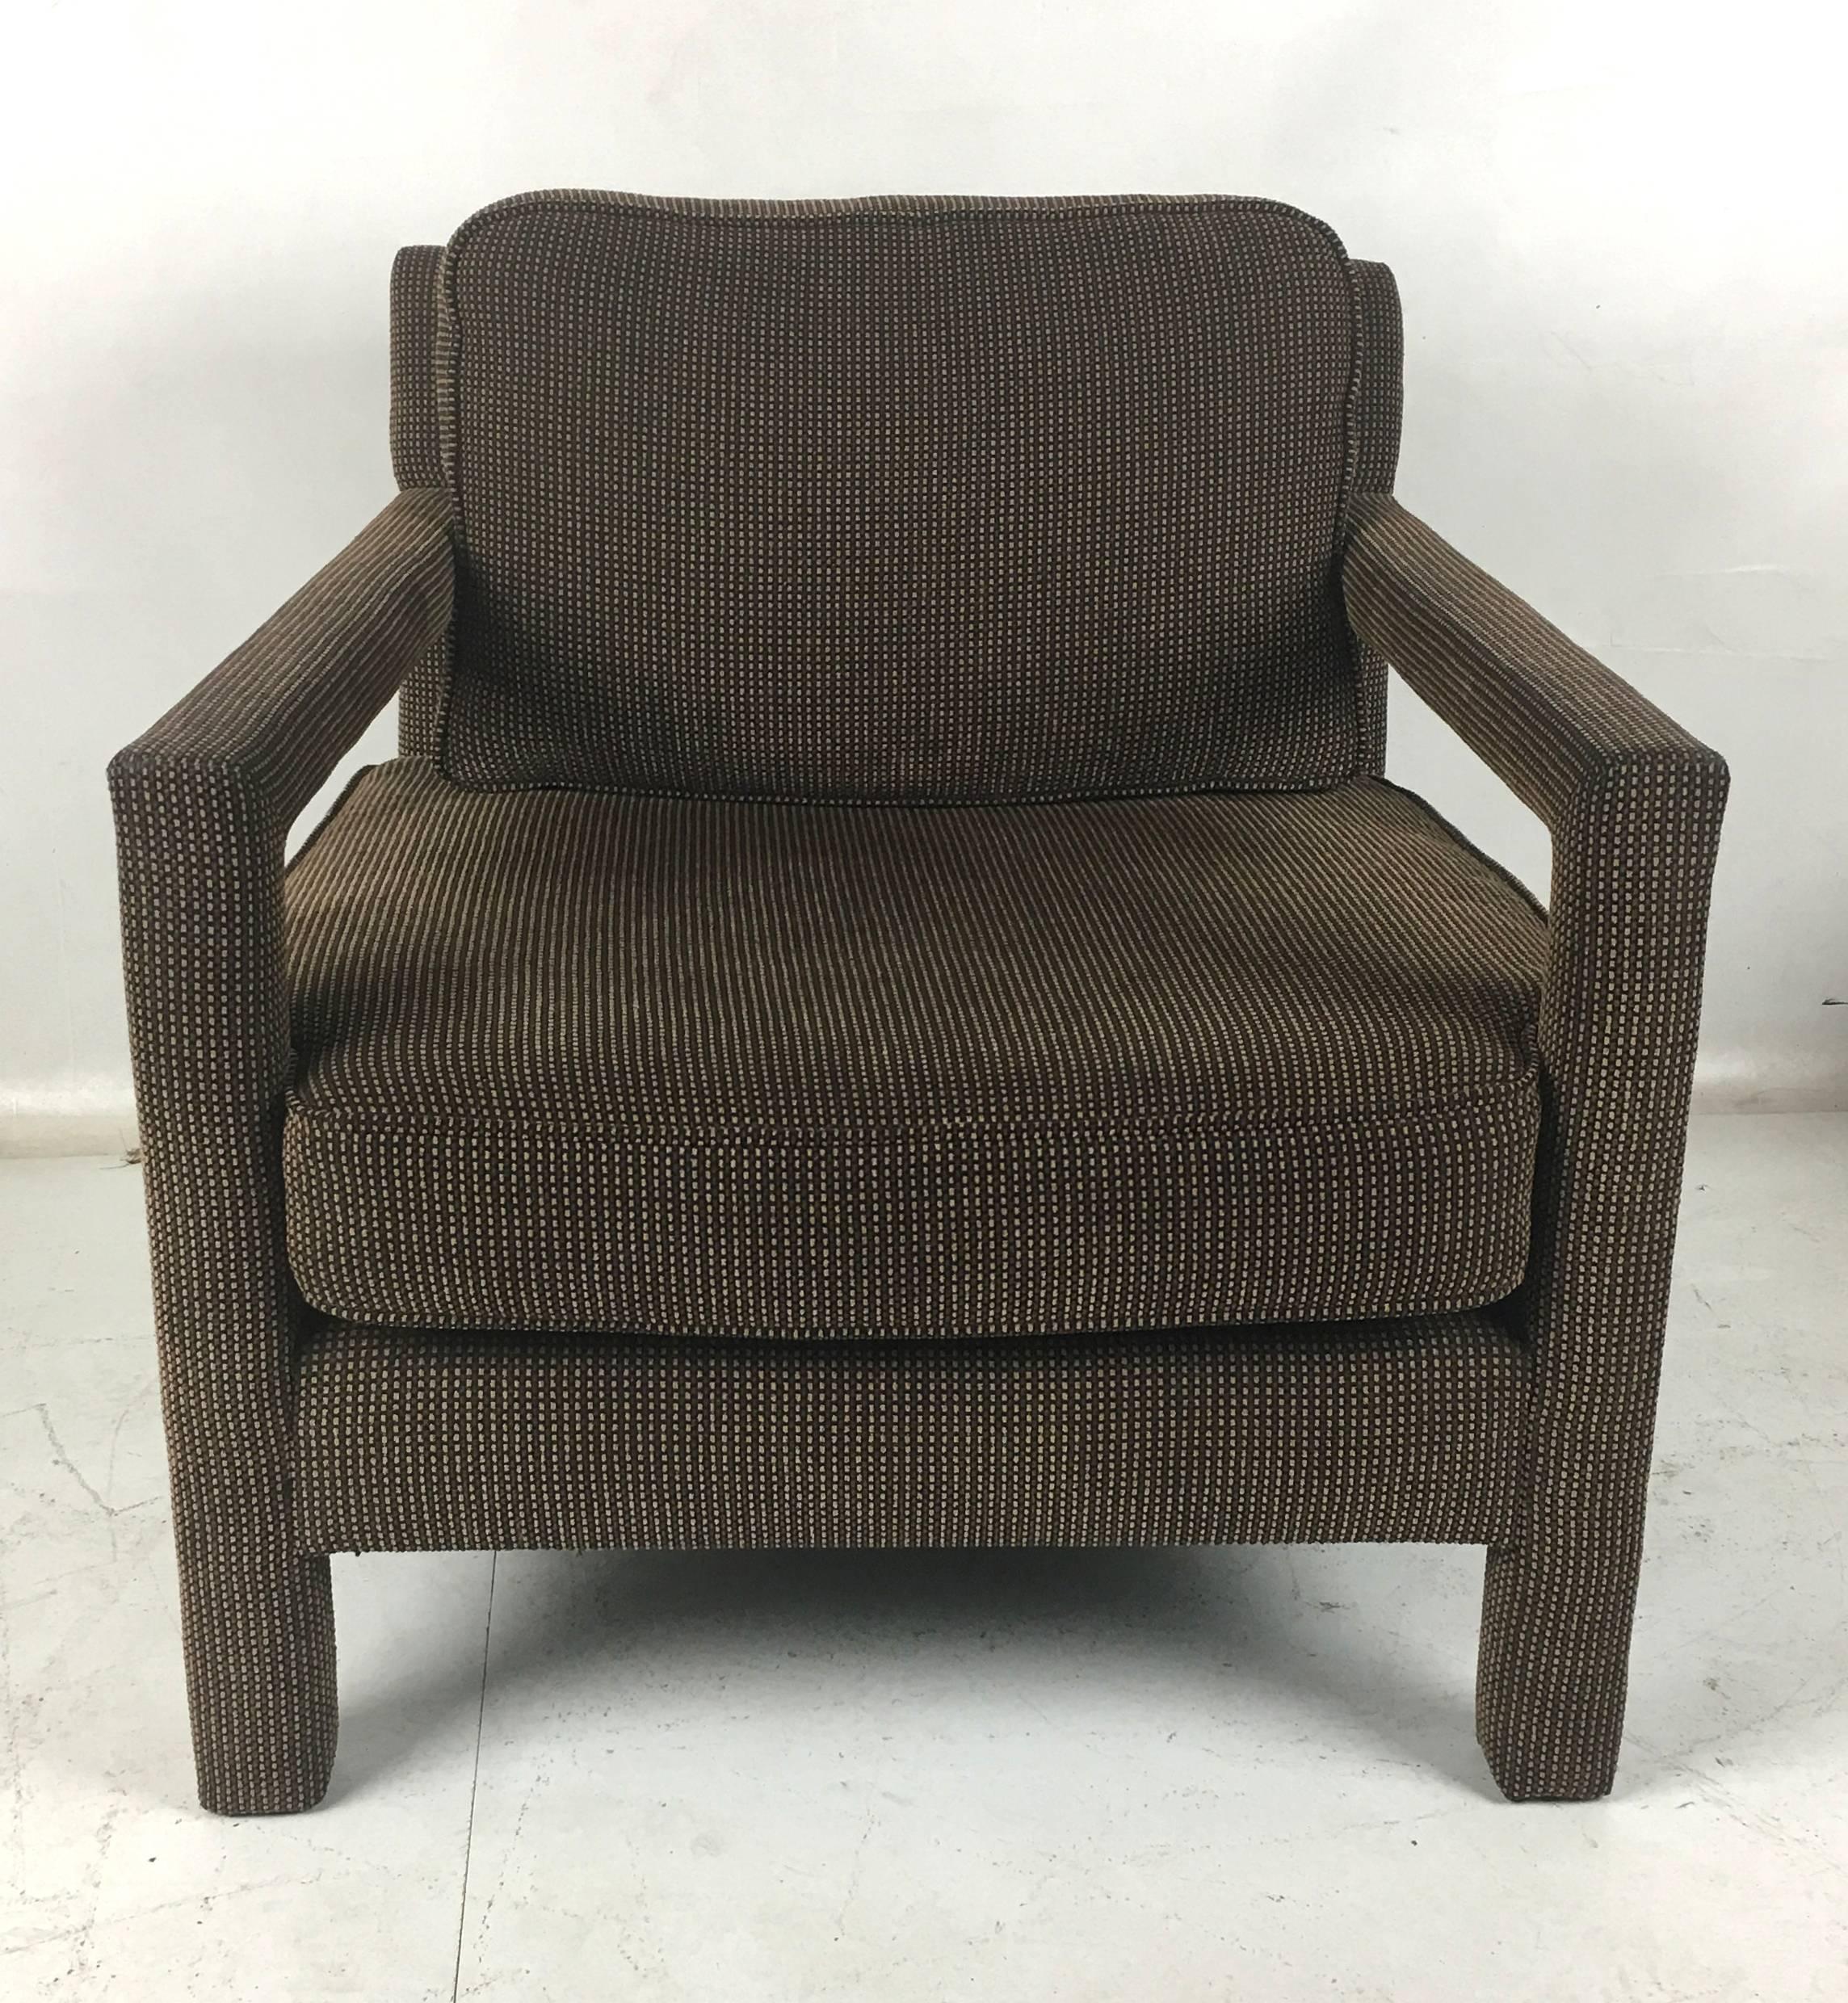 Handsome pair of fully upholstered, open-arm club chairs. The pair are beautifully scaled, super comfortable, and as stylish is it gets. Most every important designer had a version of this chair in their catalog, from Milo Baughman to John Dickinson